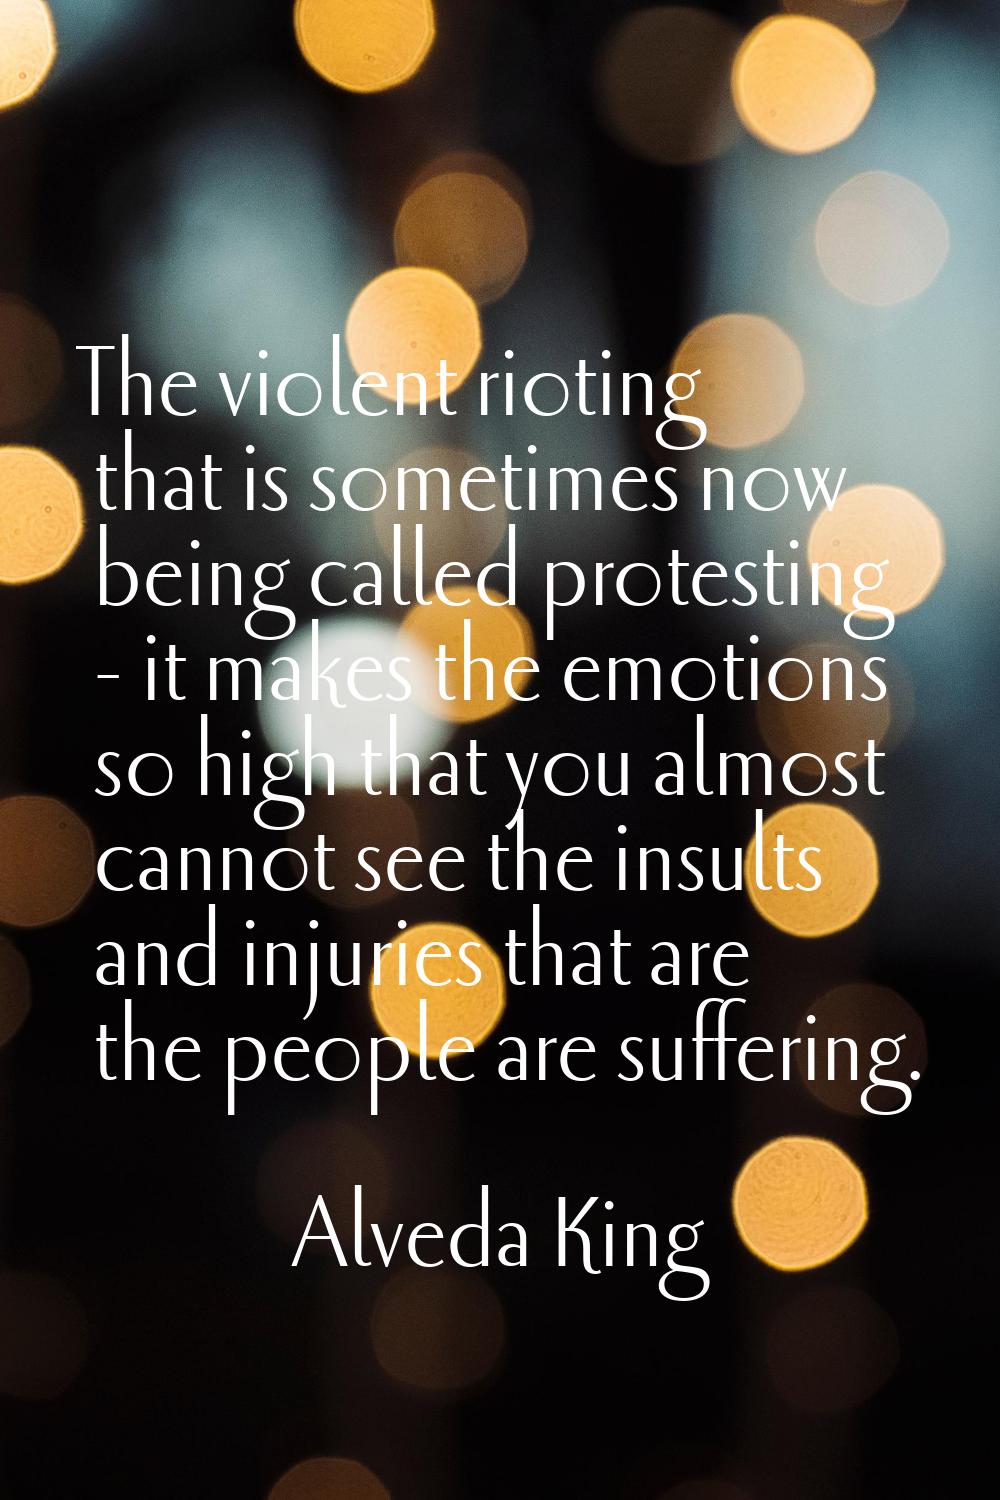 The violent rioting that is sometimes now being called protesting - it makes the emotions so high t